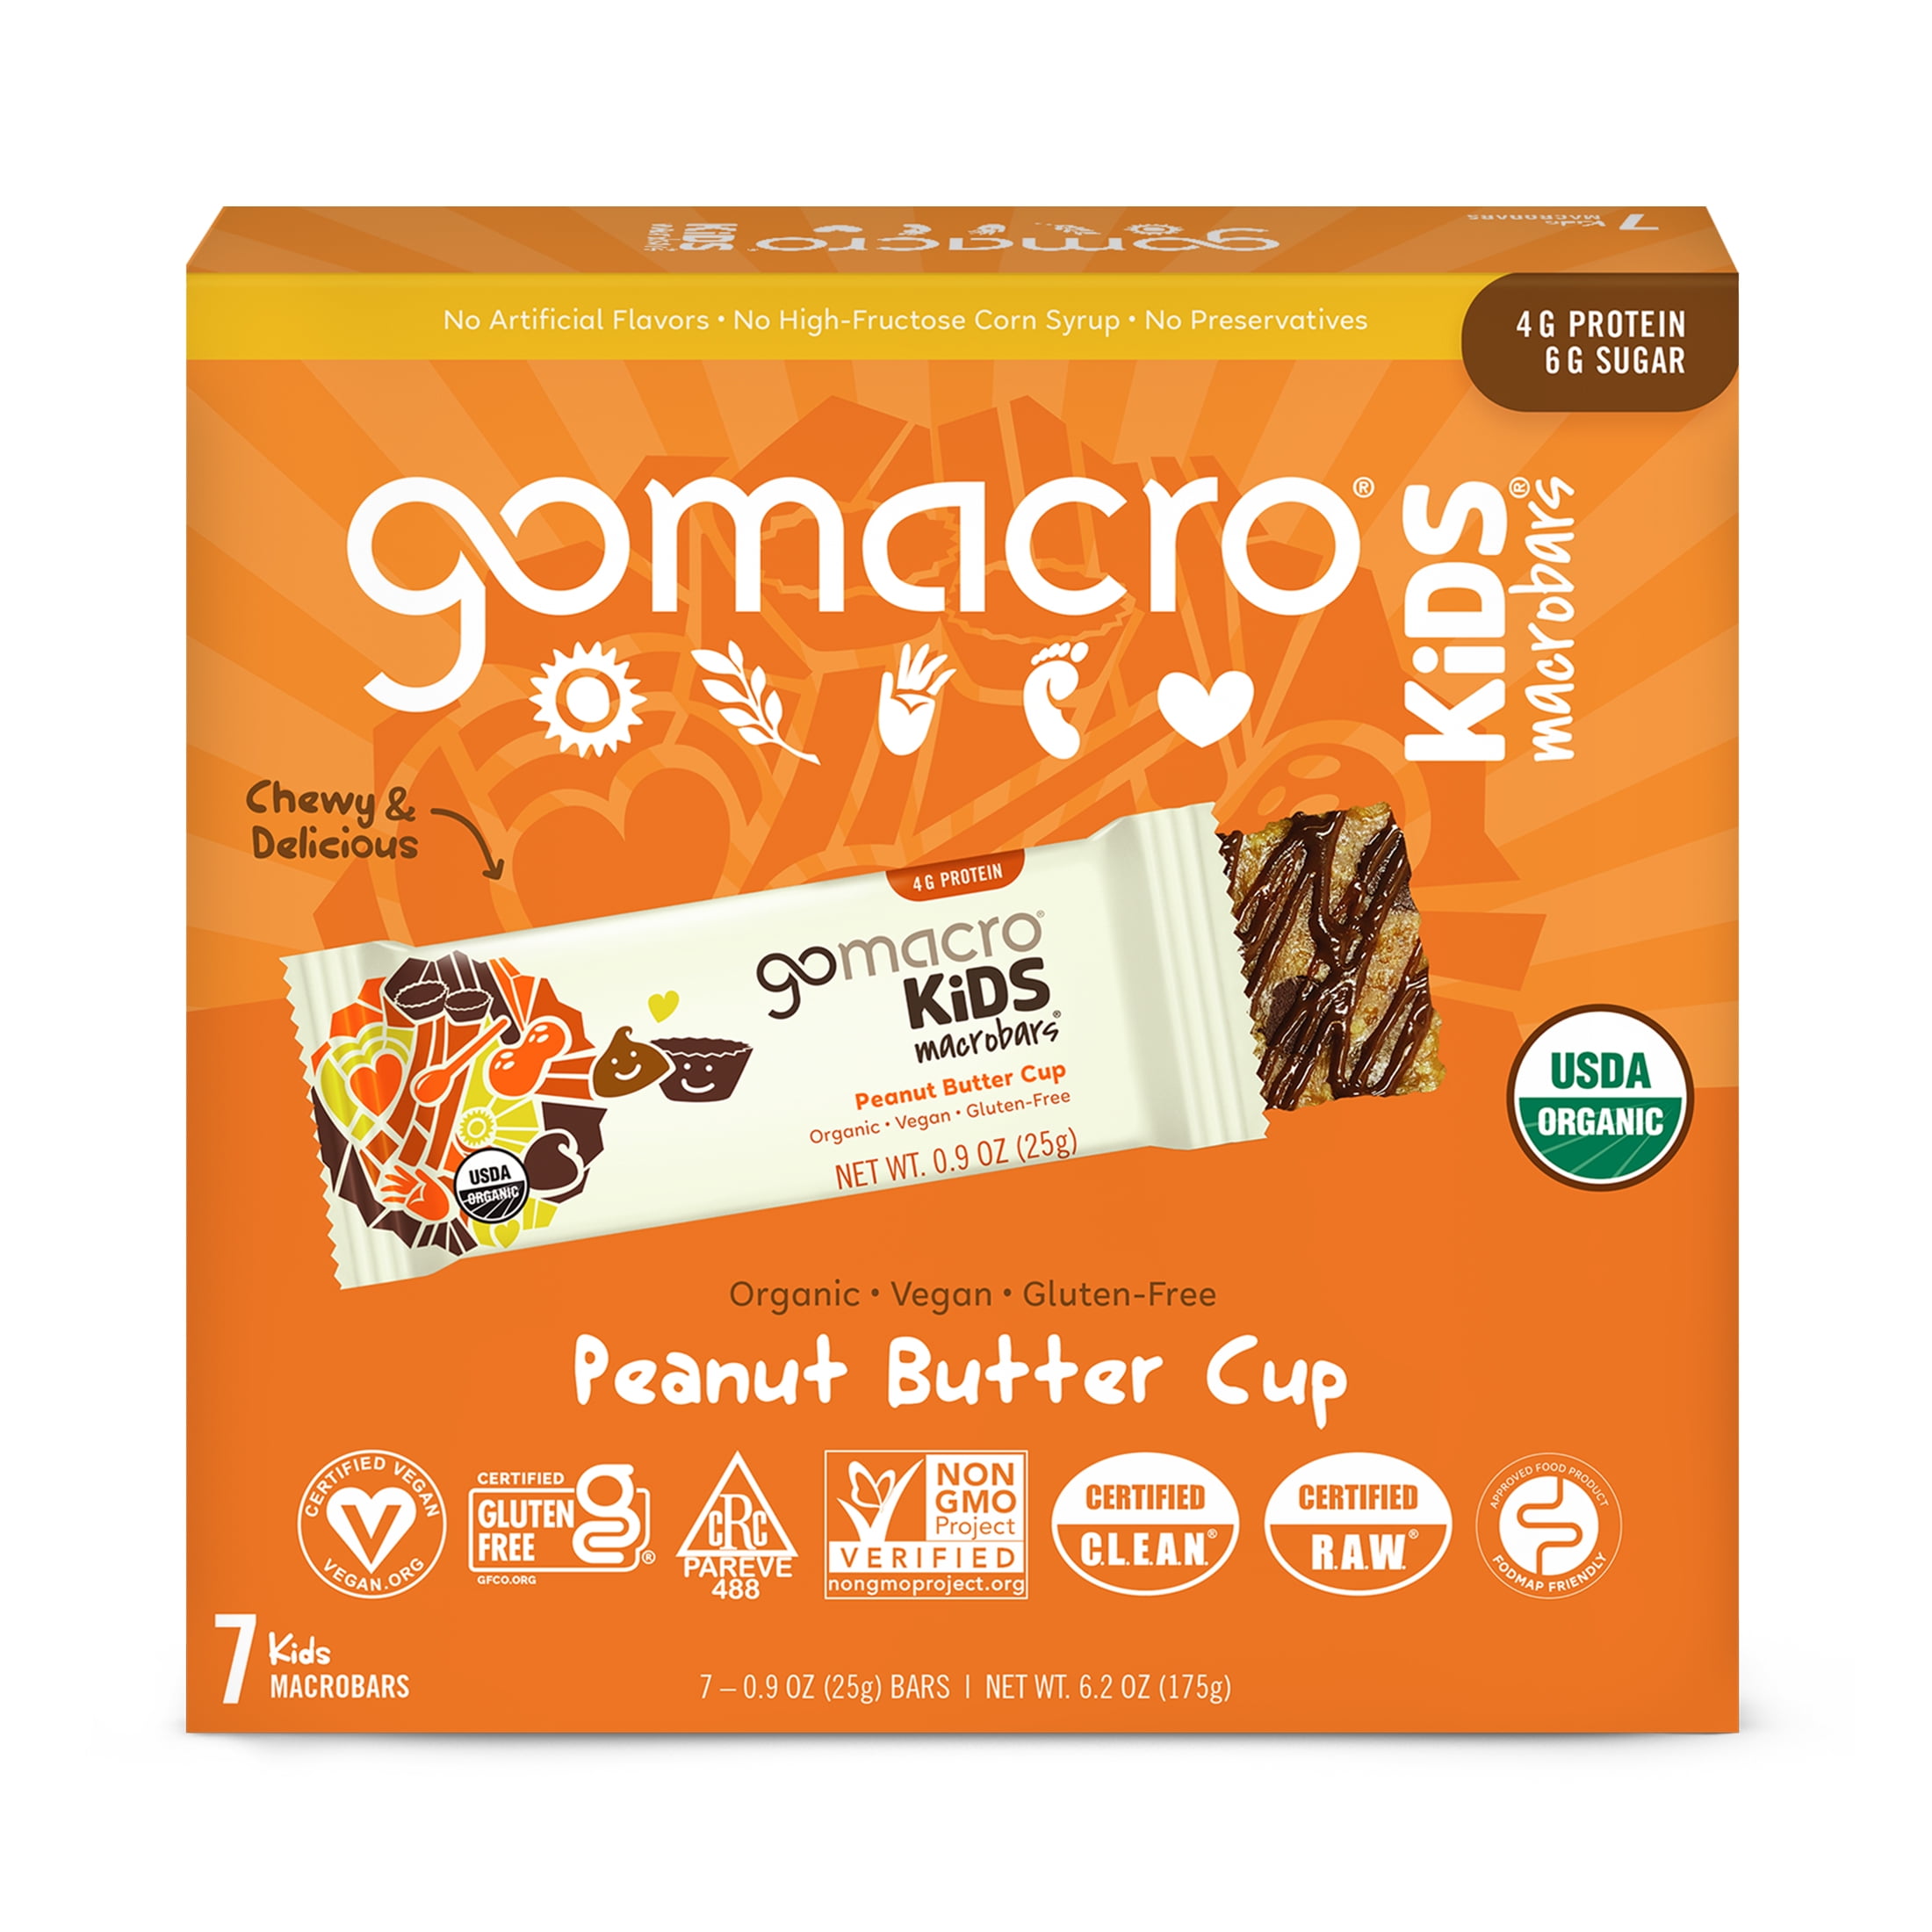 Photo 1 of [8 boxes] GoMacro Kids MacroBar, Peanut Butter Cup, Organic Vegan Snack Bars, 7 ct [EXPIRED]